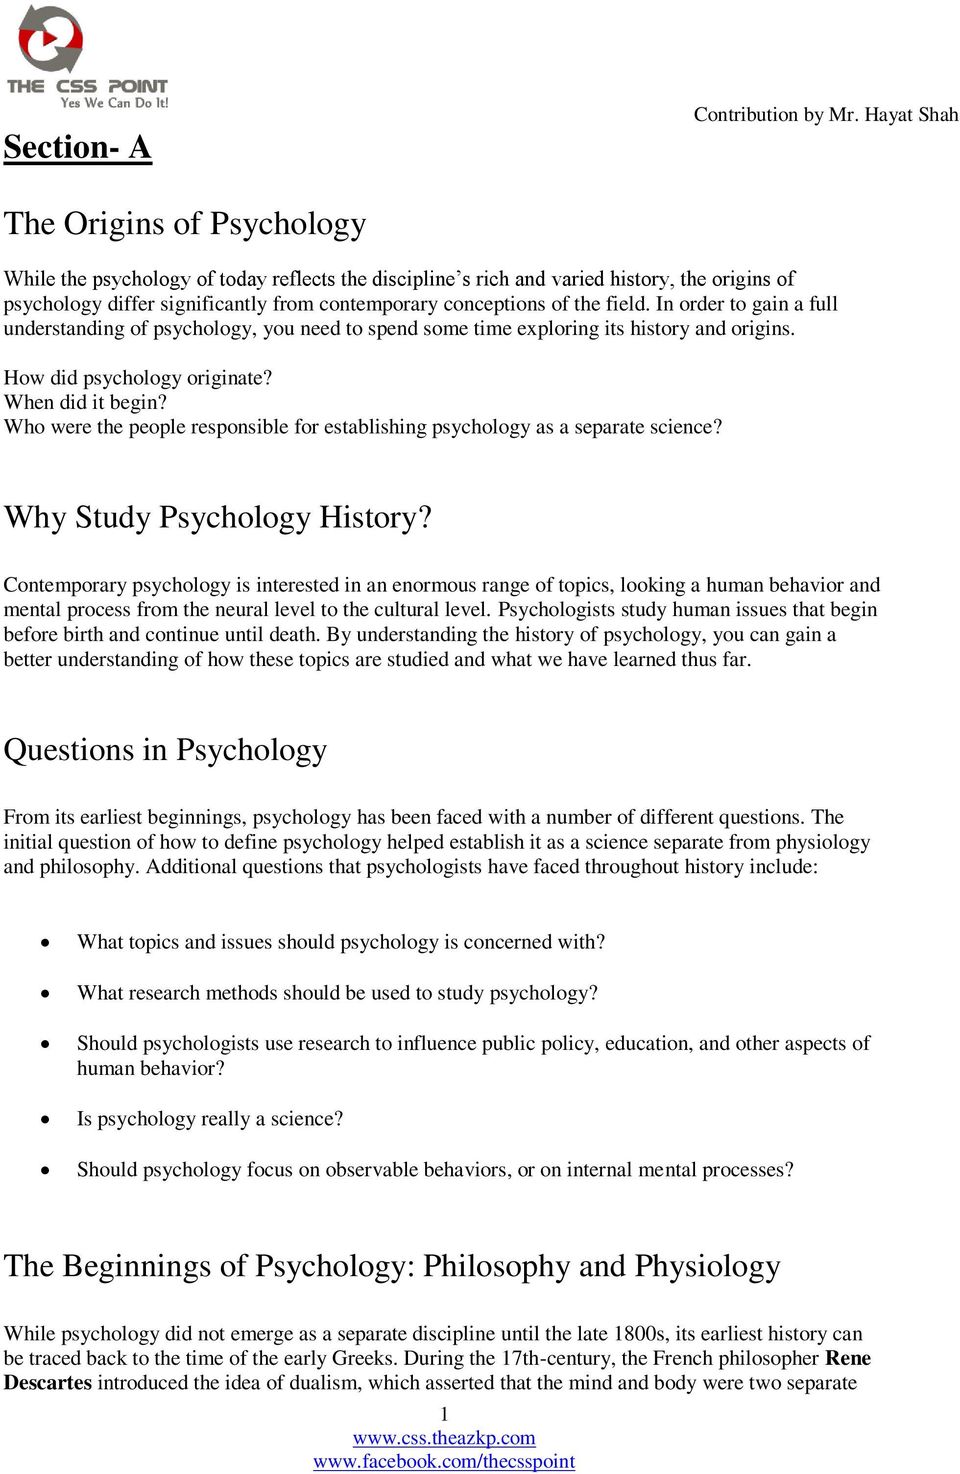 the field. In order to gain a full understanding of psychology, you need to spend some time exploring its history and origins. How did psychology originate? When did it begin?